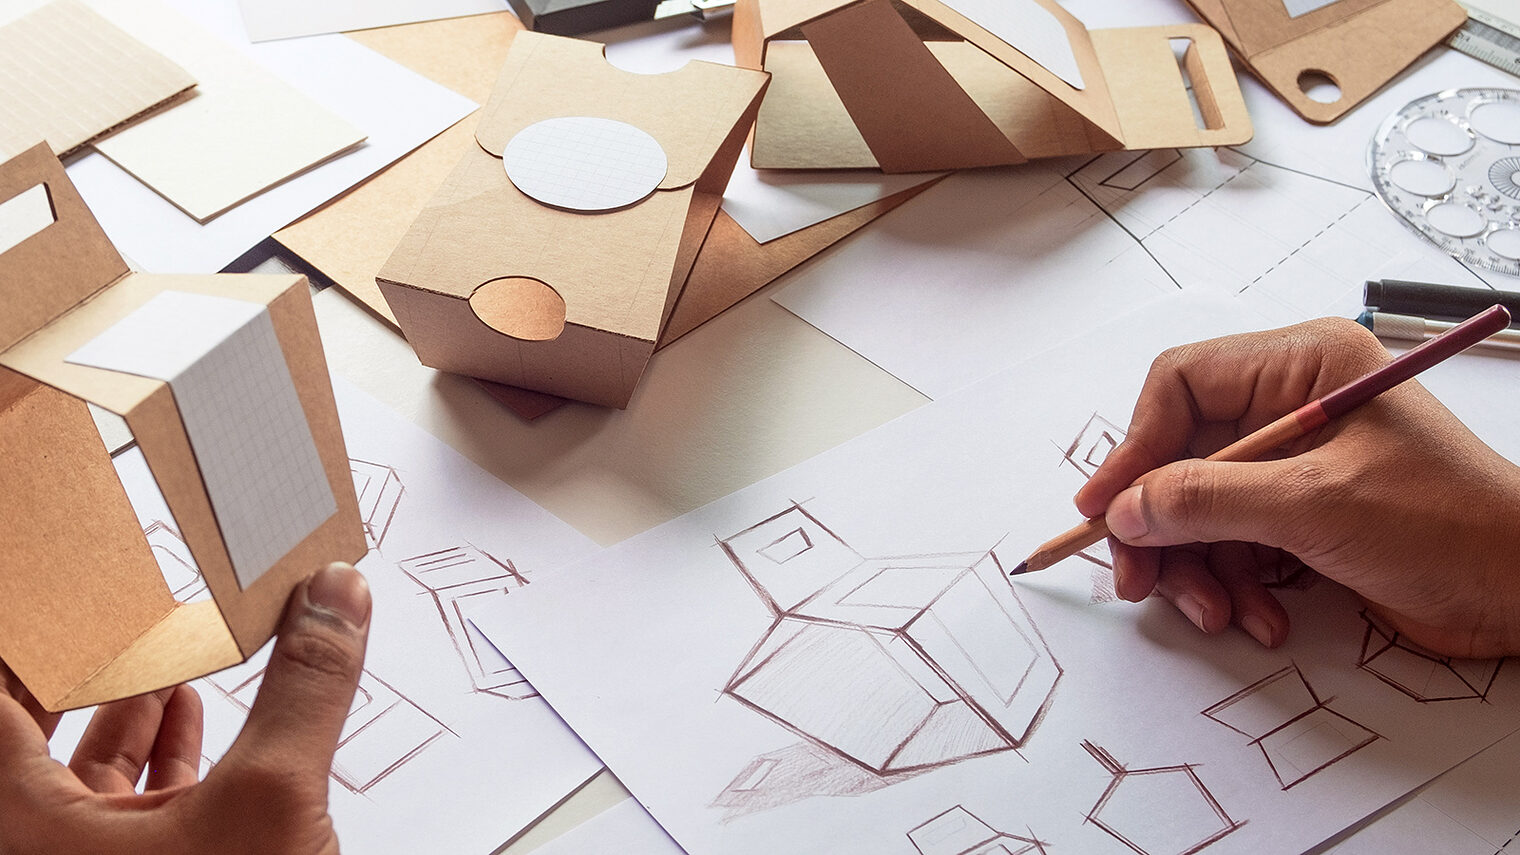 Designer sketching drawing design Brown craft cardboard paper product eco packaging mockup box development template package branding Label . designer studio concept . Schlagwort(e): product, packaging, package, design, designer, template, development, recycle, eco, paper, cardboard, drawing, recycling, pack, branding, sketching, process, mockup, business, creative, packing, art, box, concept, craft, creation, creativity, desk, gift, graphic, imagination, job, label, marketing, office, people, person, plan, pouch, production, professional, project, retail, sketch, style, work, working, workplace